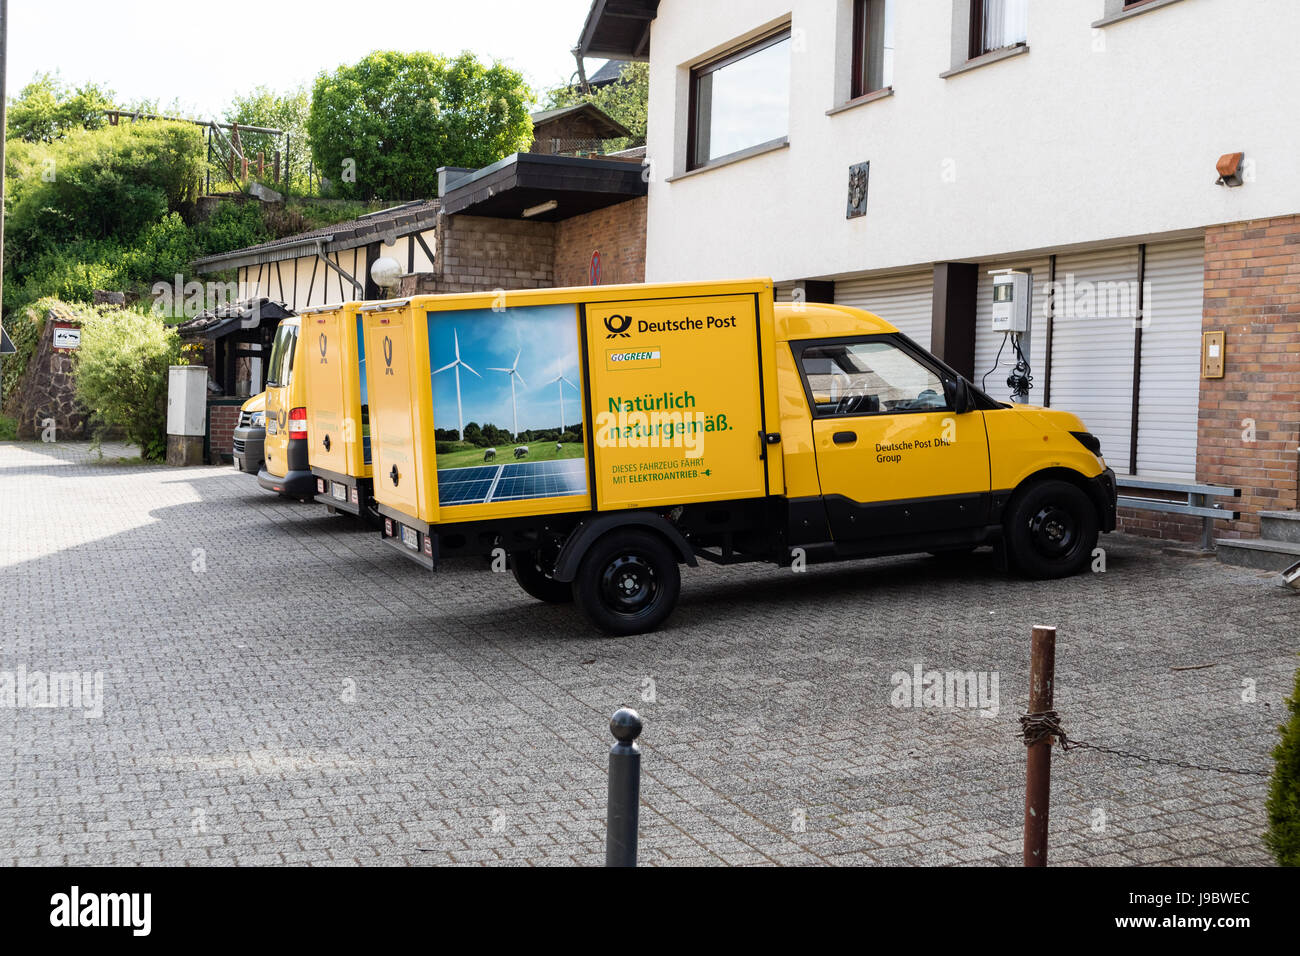 Two 'Streetscooter' - electric car with square box from Deutsche Post DHL - Nettersheim, North Rhine Westphalia, NRW, Germany, Europe Stock Photo